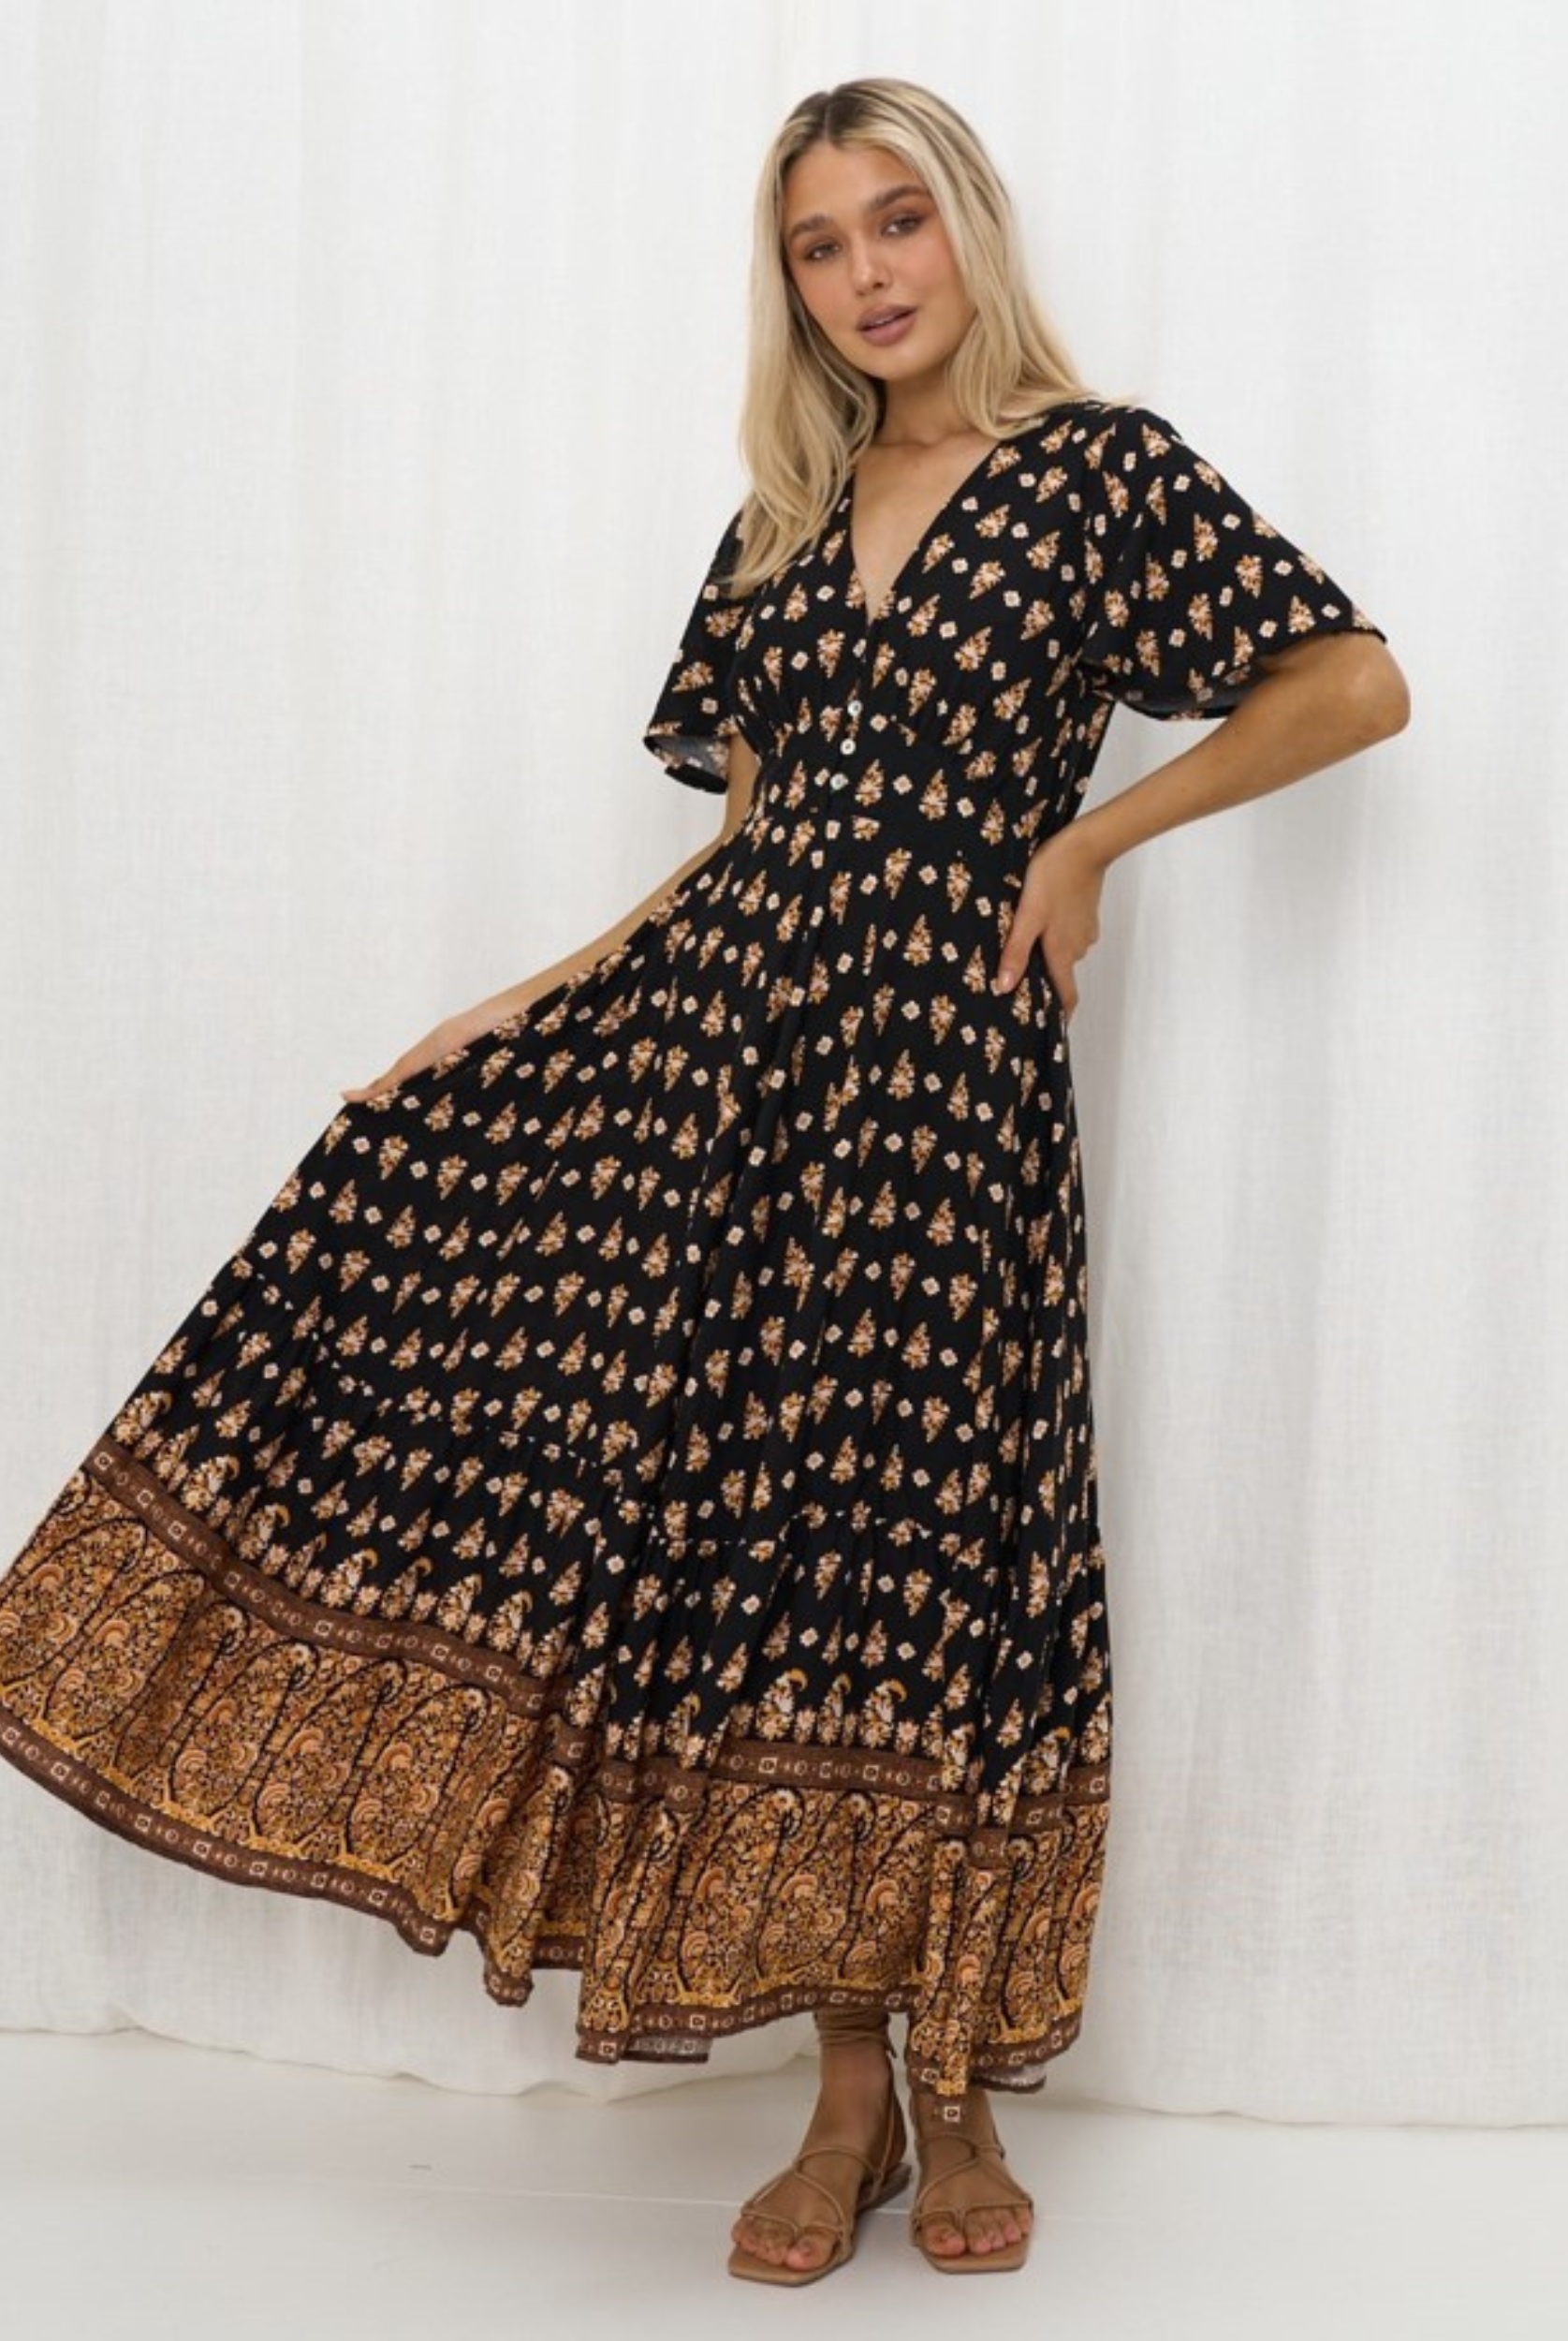 Model wearing the Iris Maxi Gypset Dress in black print with button front and cap sleeve